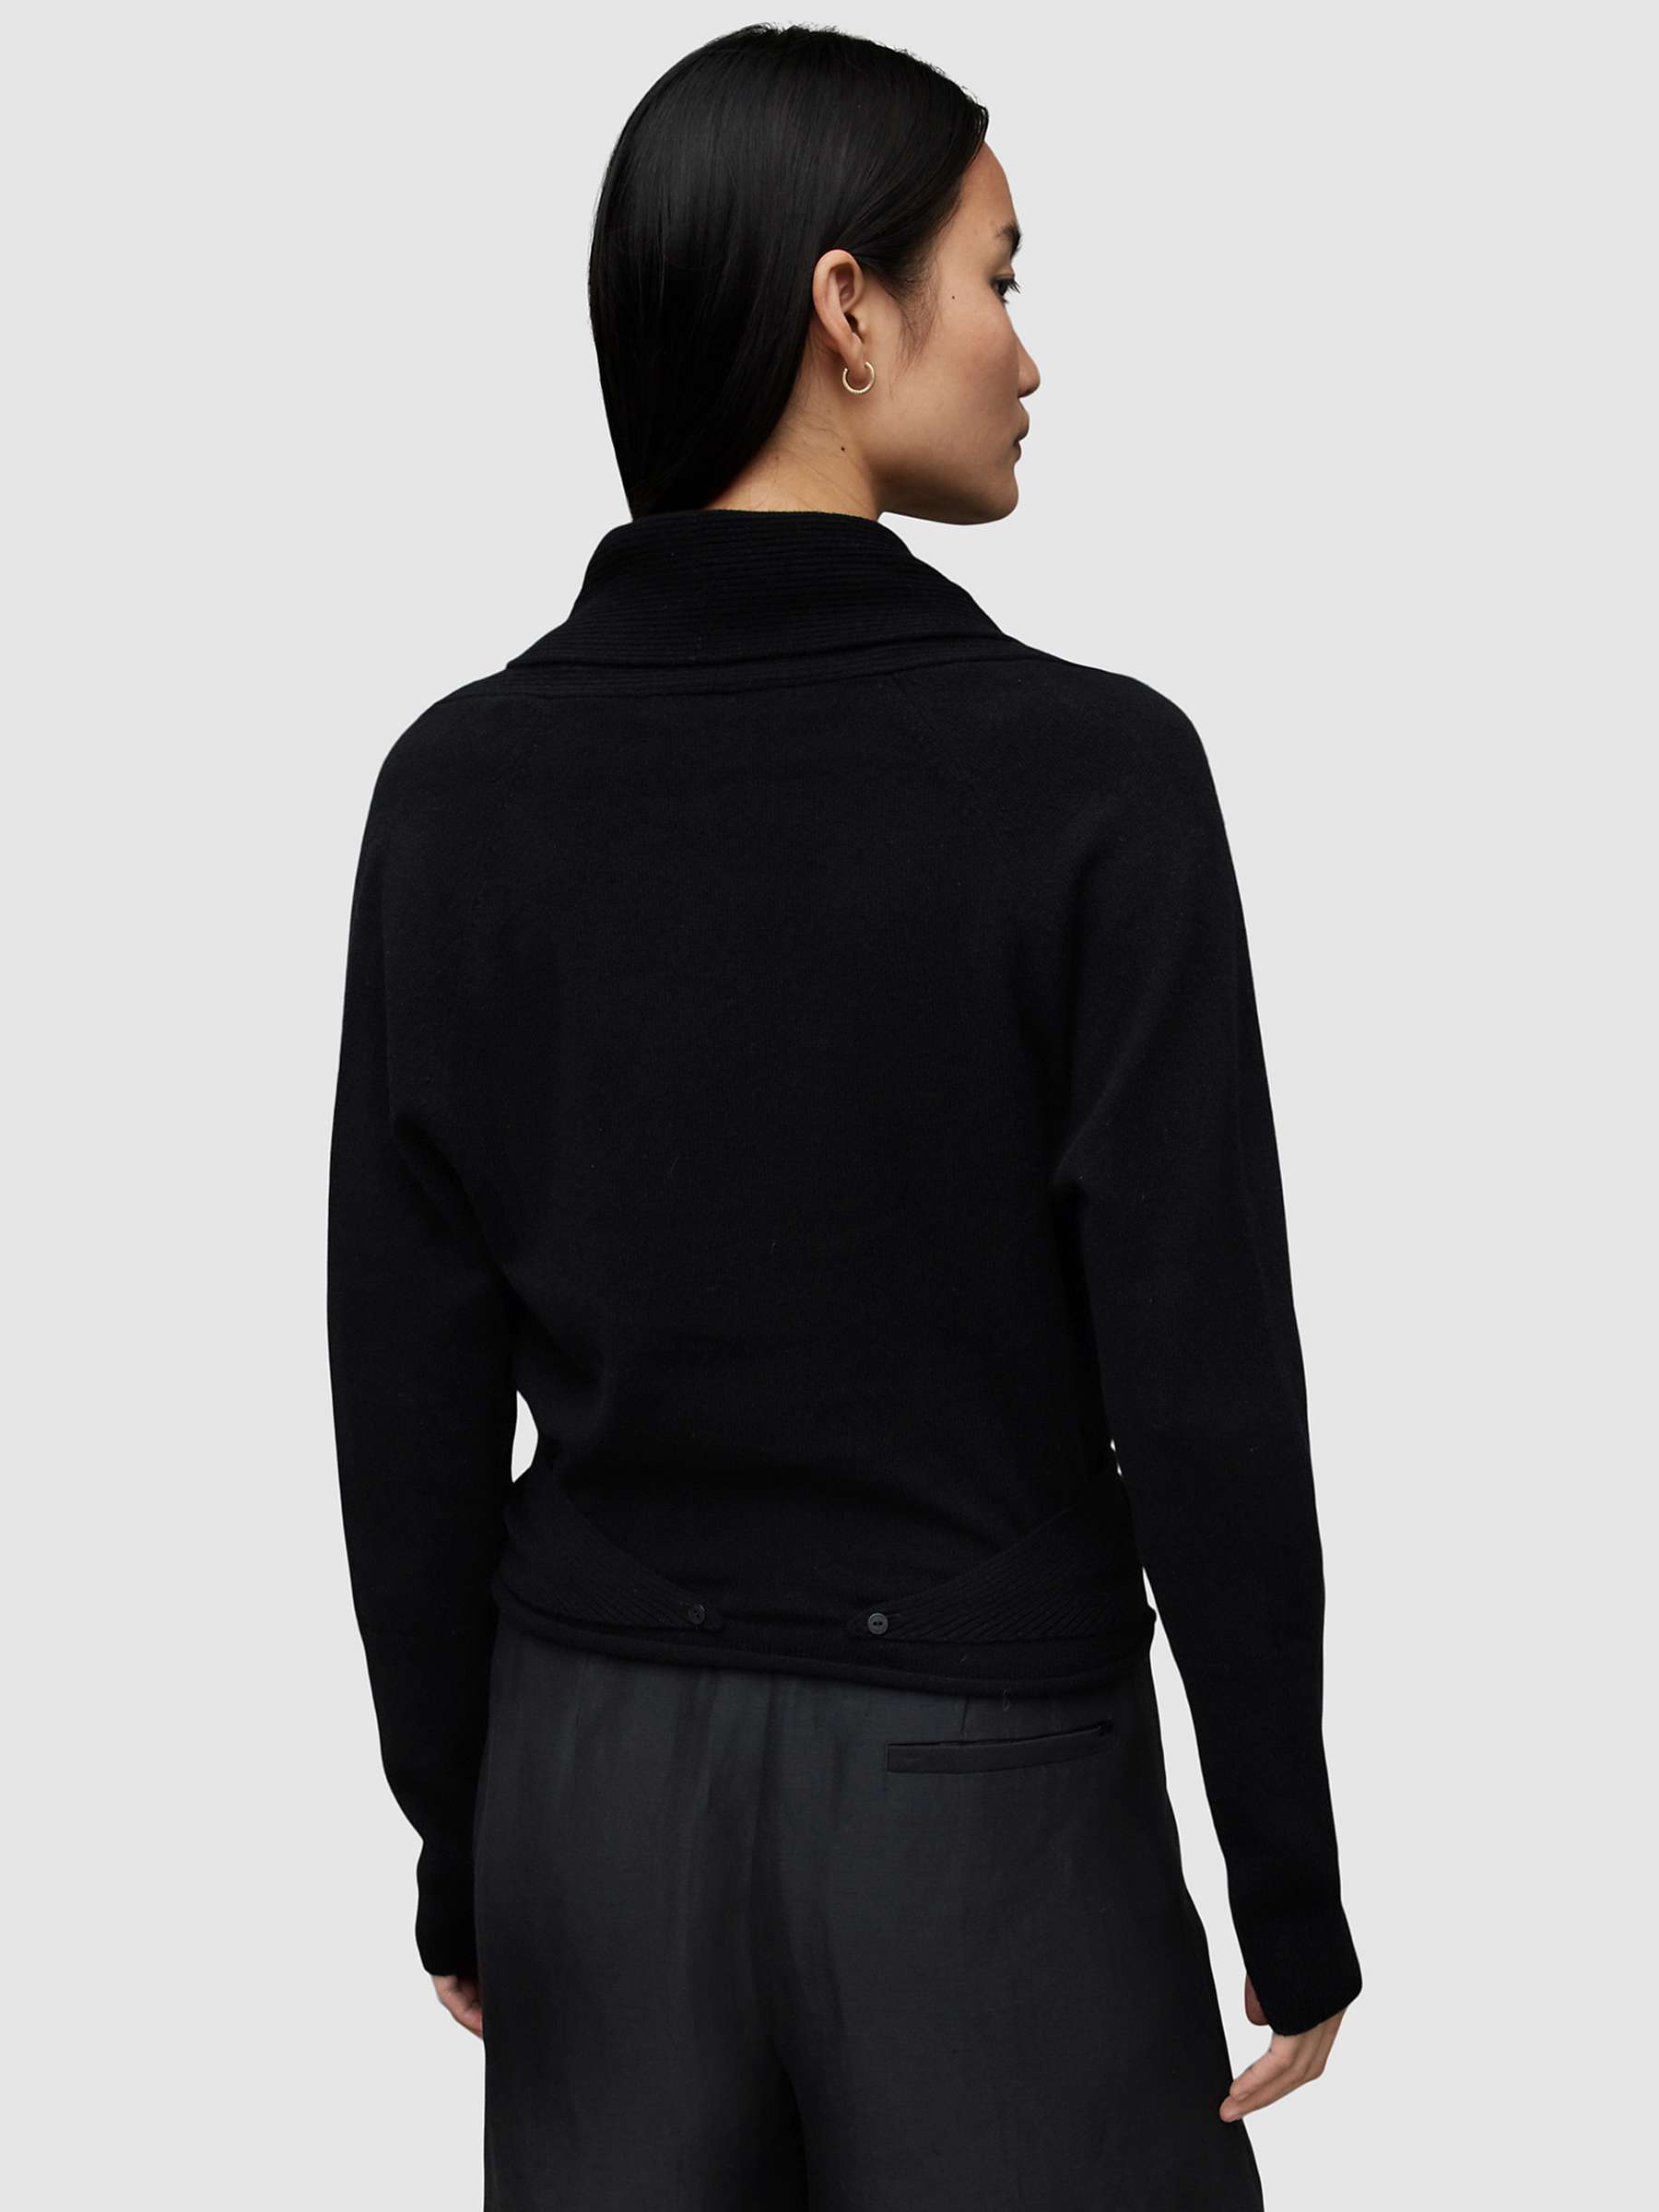 Buy AllSaints Pirate Cashmere Cross Over Cardigan Online at johnlewis.com